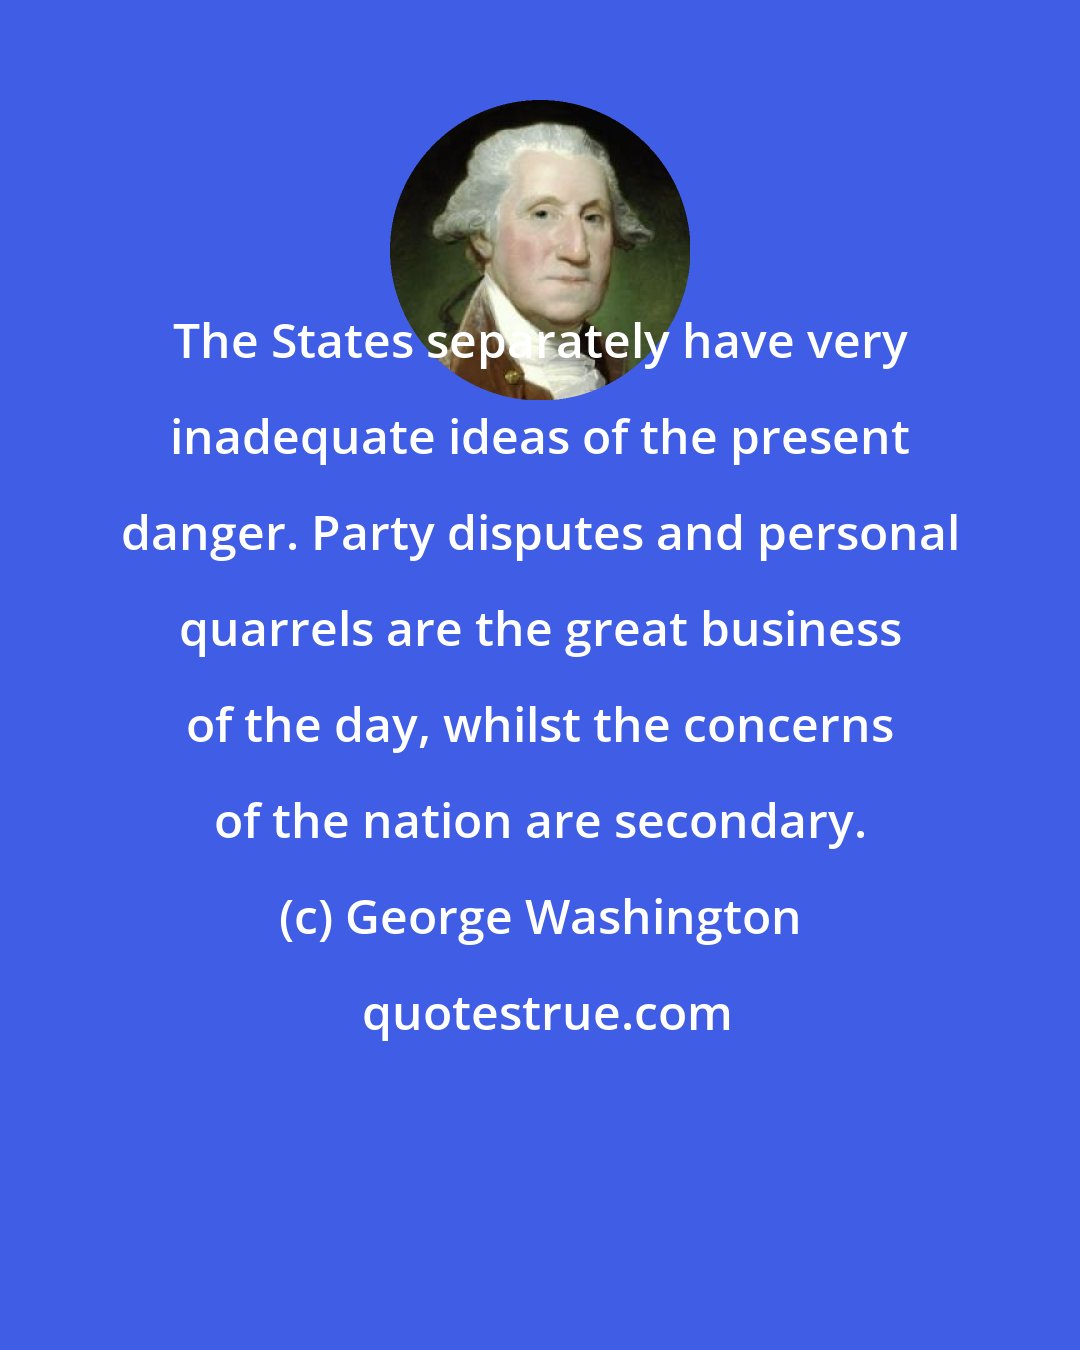 George Washington: The States separately have very inadequate ideas of the present danger. Party disputes and personal quarrels are the great business of the day, whilst the concerns of the nation are secondary.